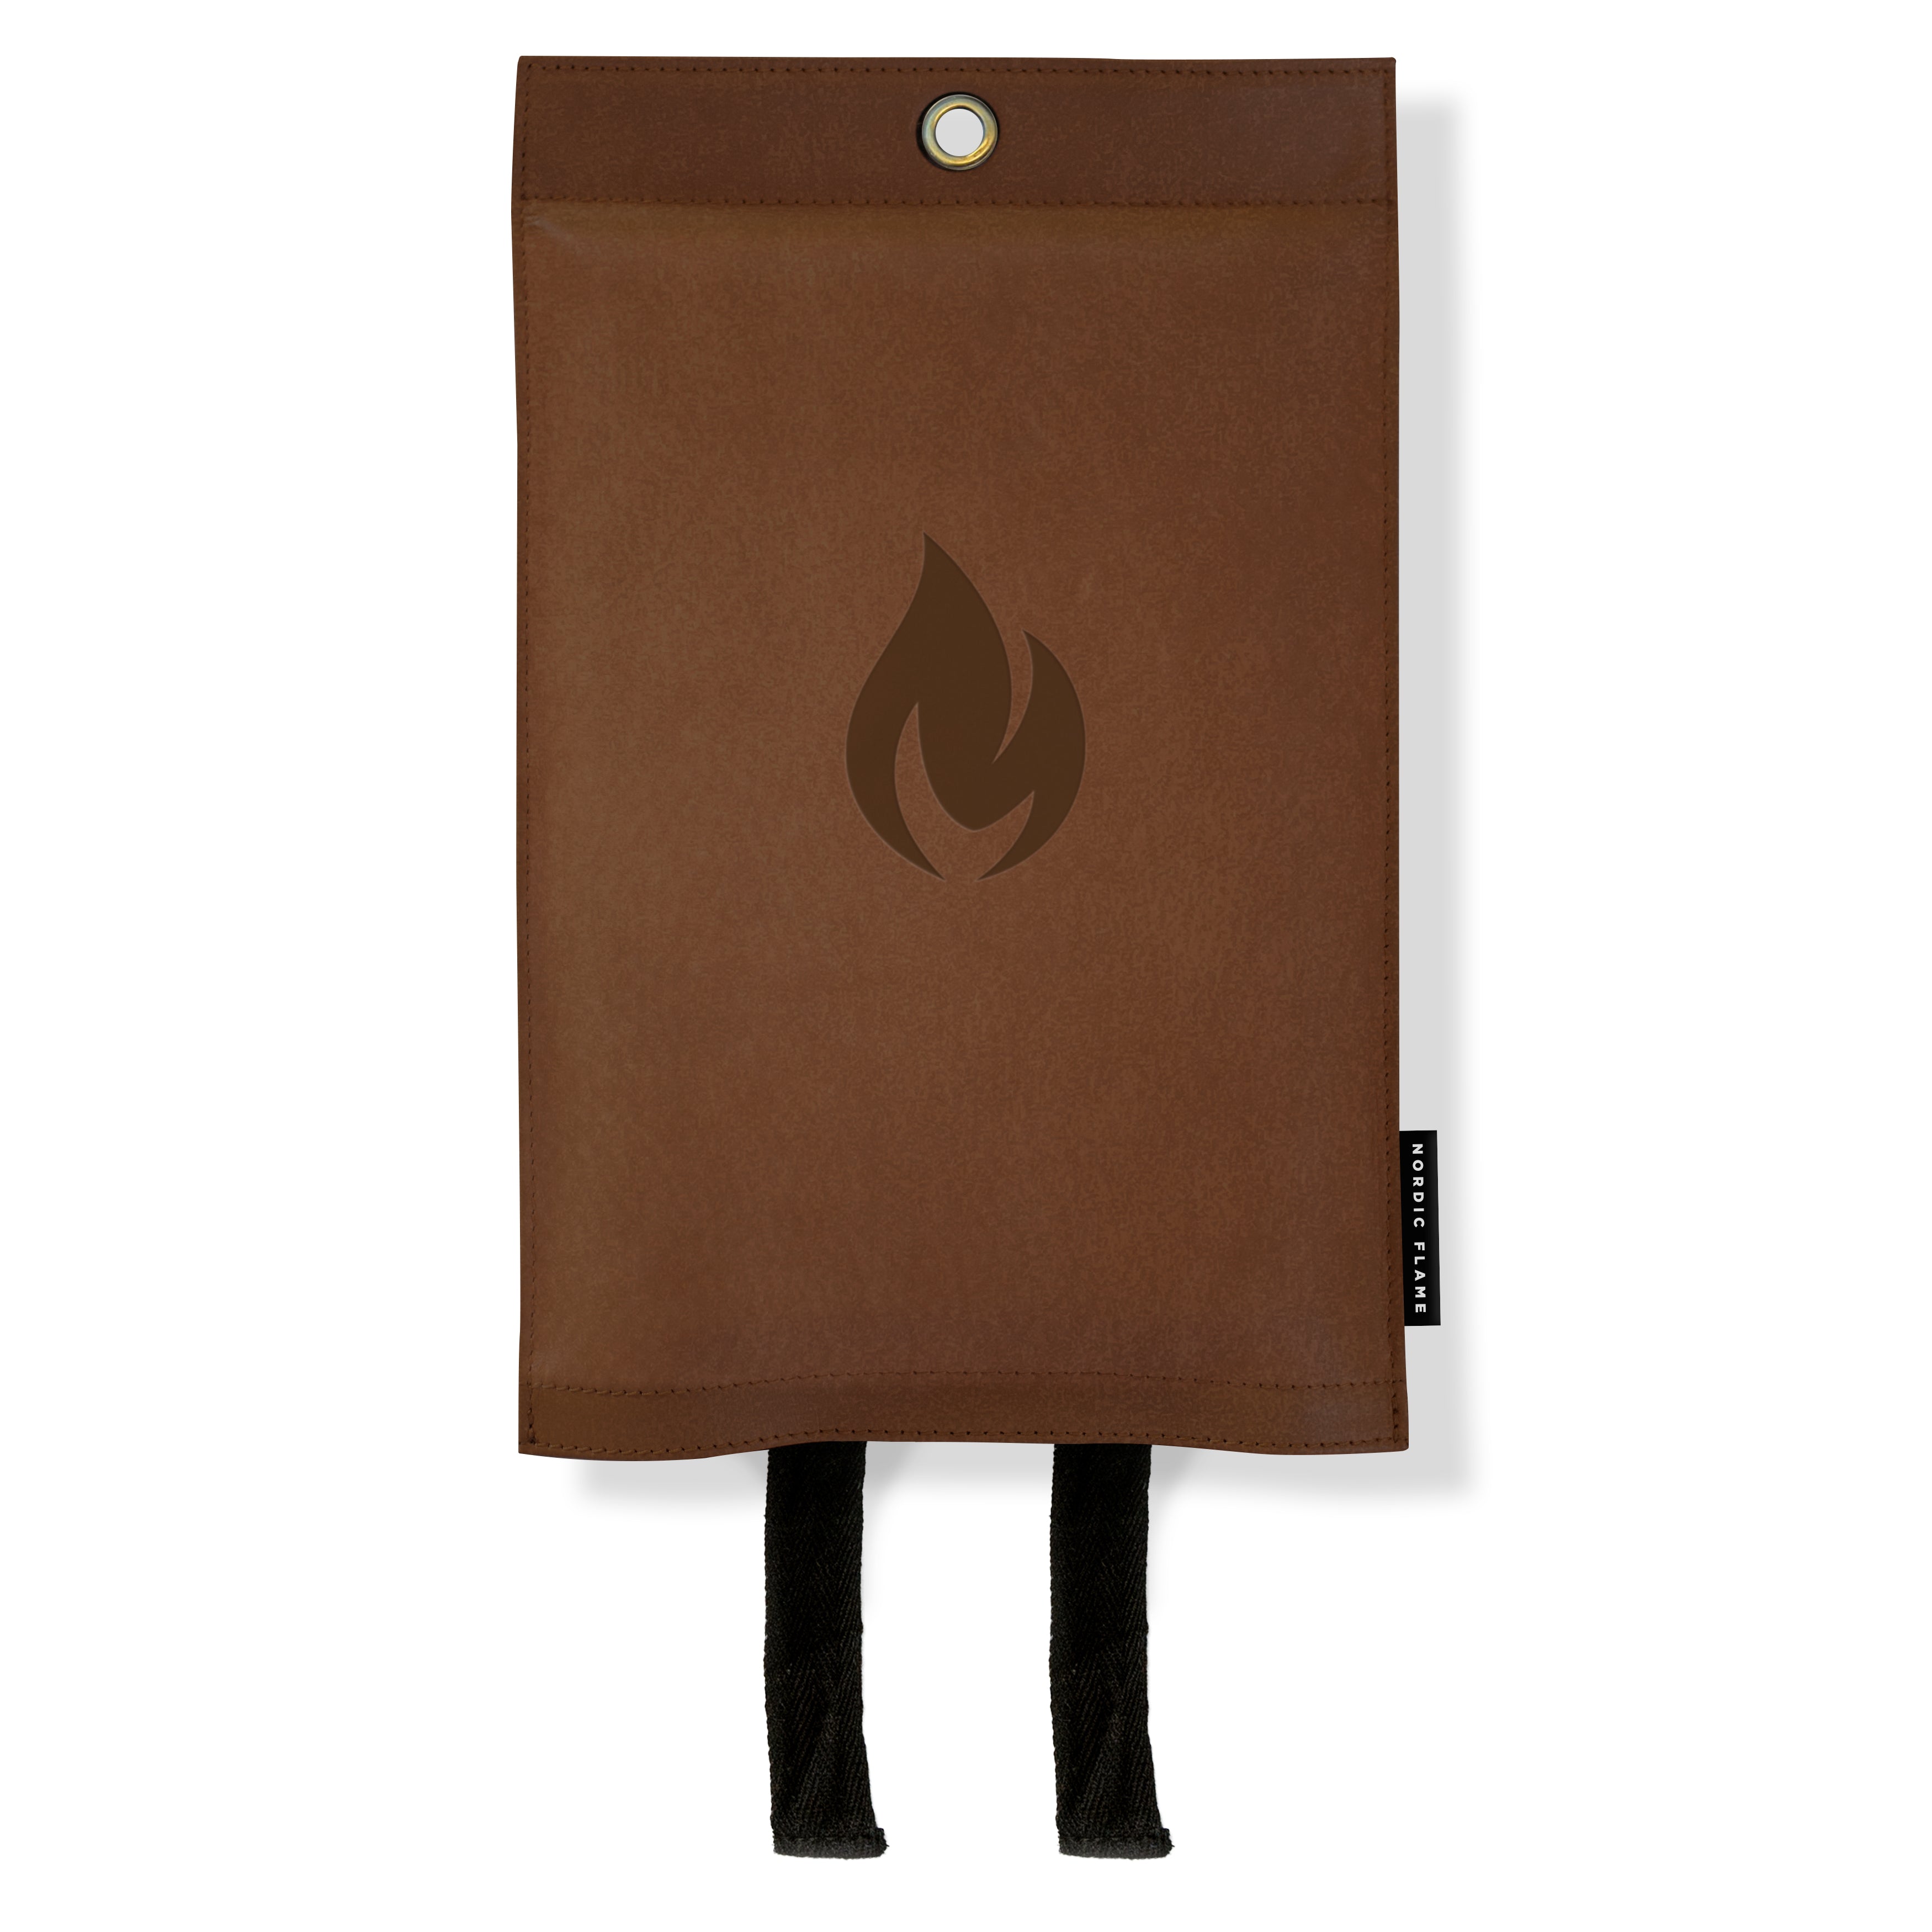 Fire Blanket - Leather dark brown – Nordic Flame